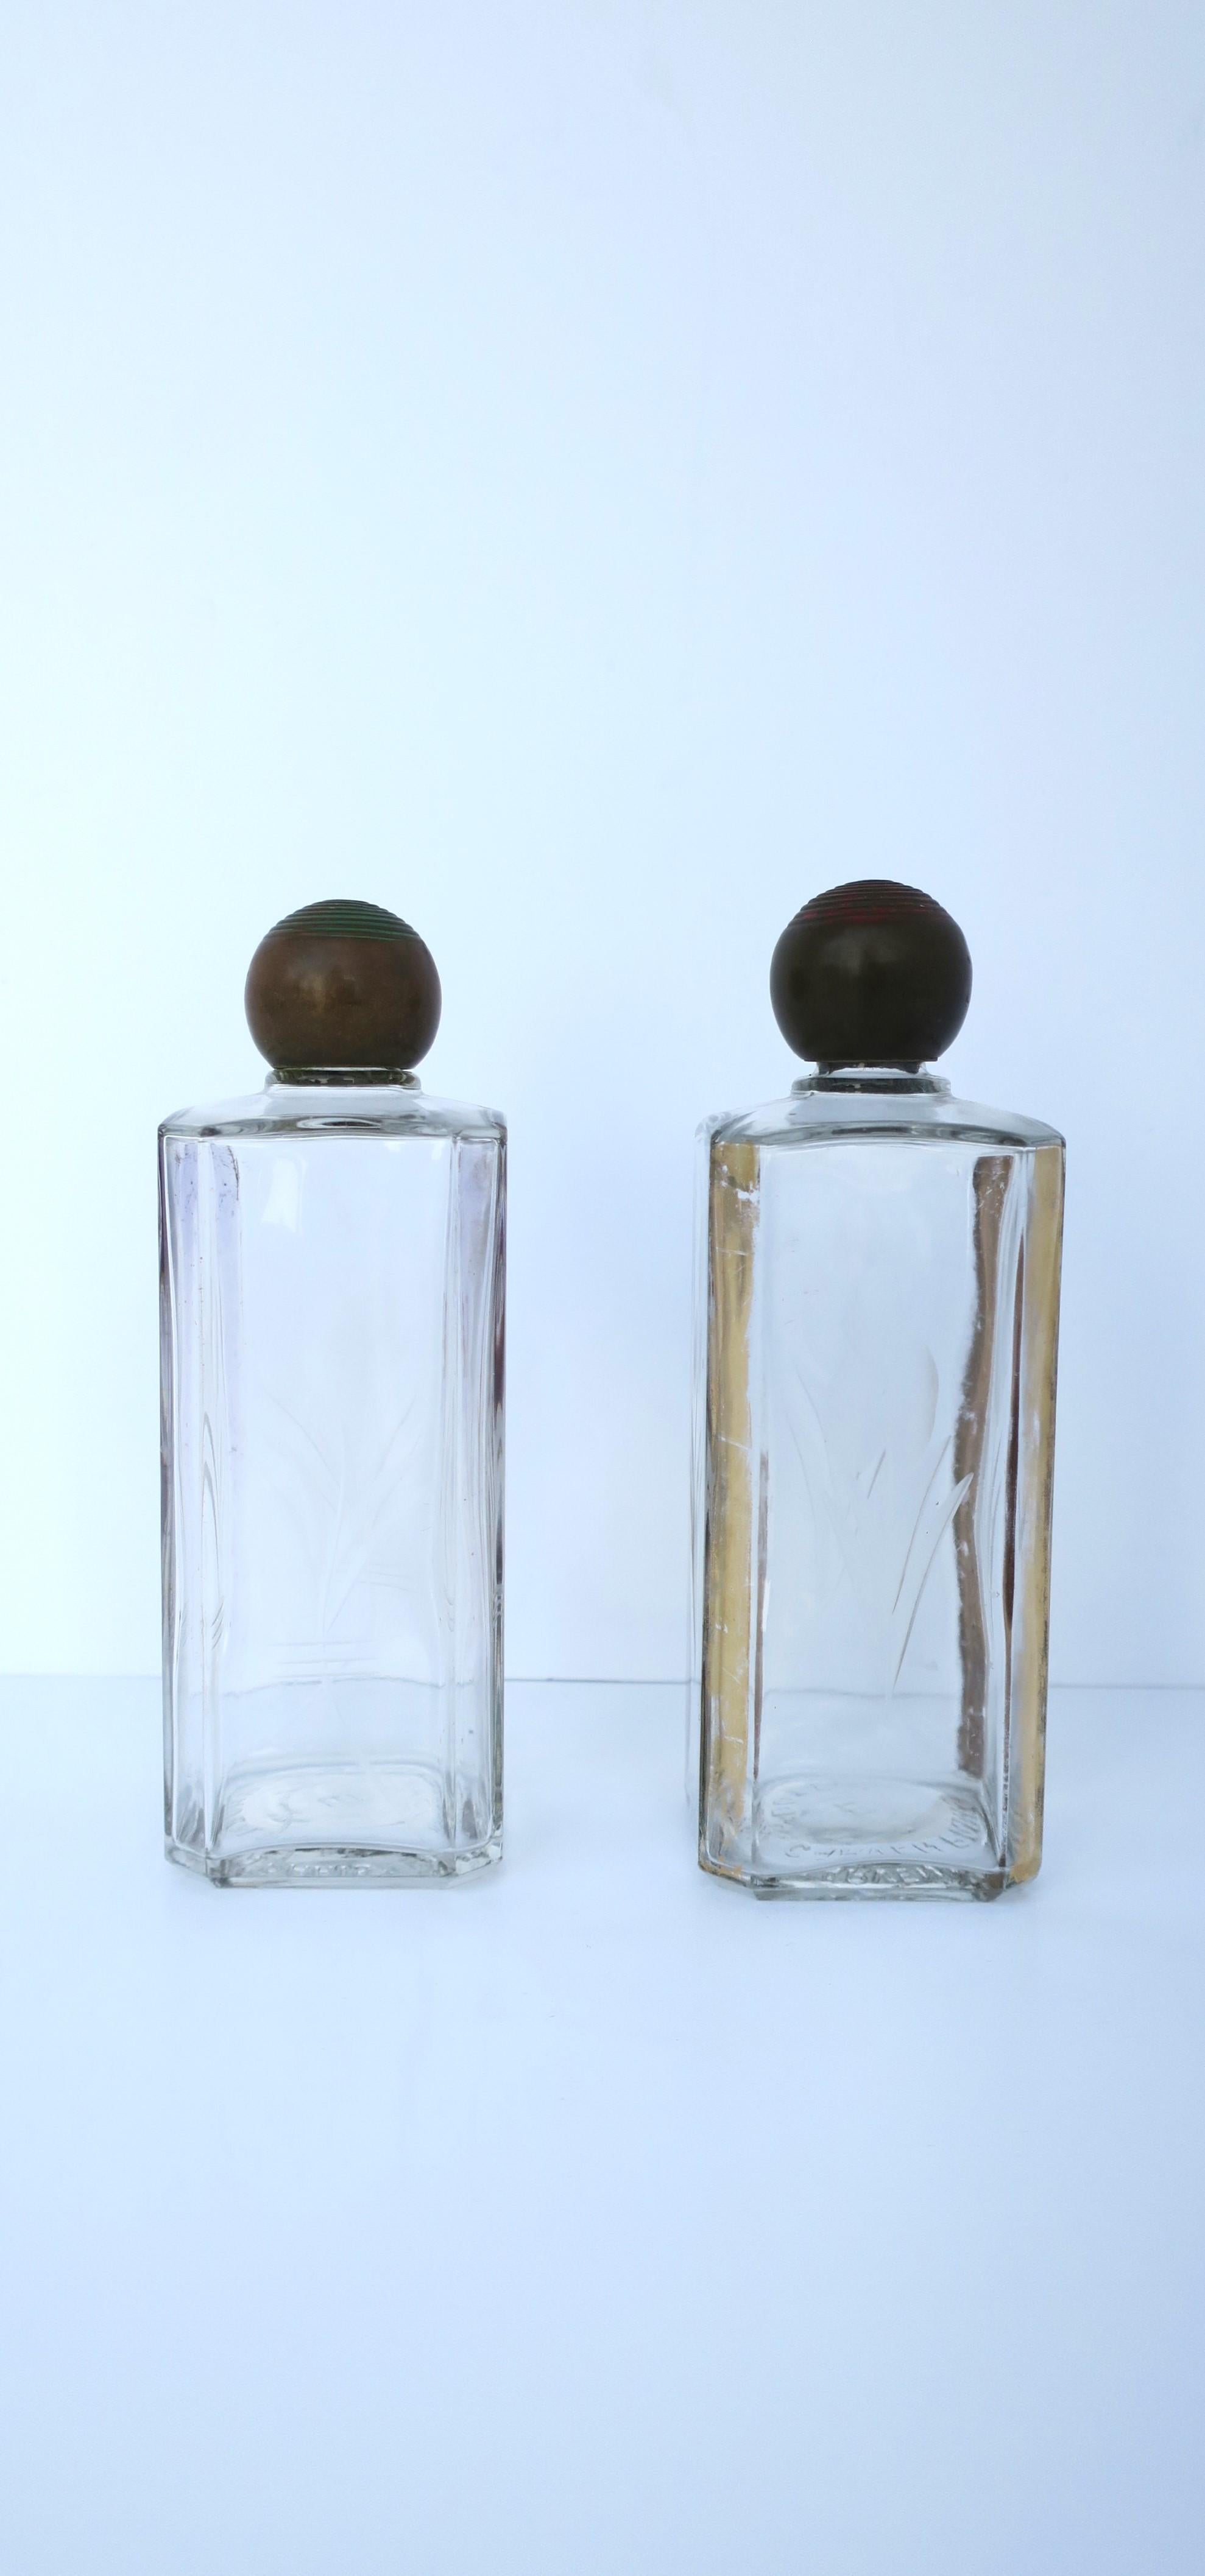 A beautiful pair of French Art Deco period perfume glass bottles with etched design, gold gilt accent, and bronze tops, from luxury fashion Maison Carven, circa early-20th century, 1940s, Paris, France. Bottles have a modern floral etched design on